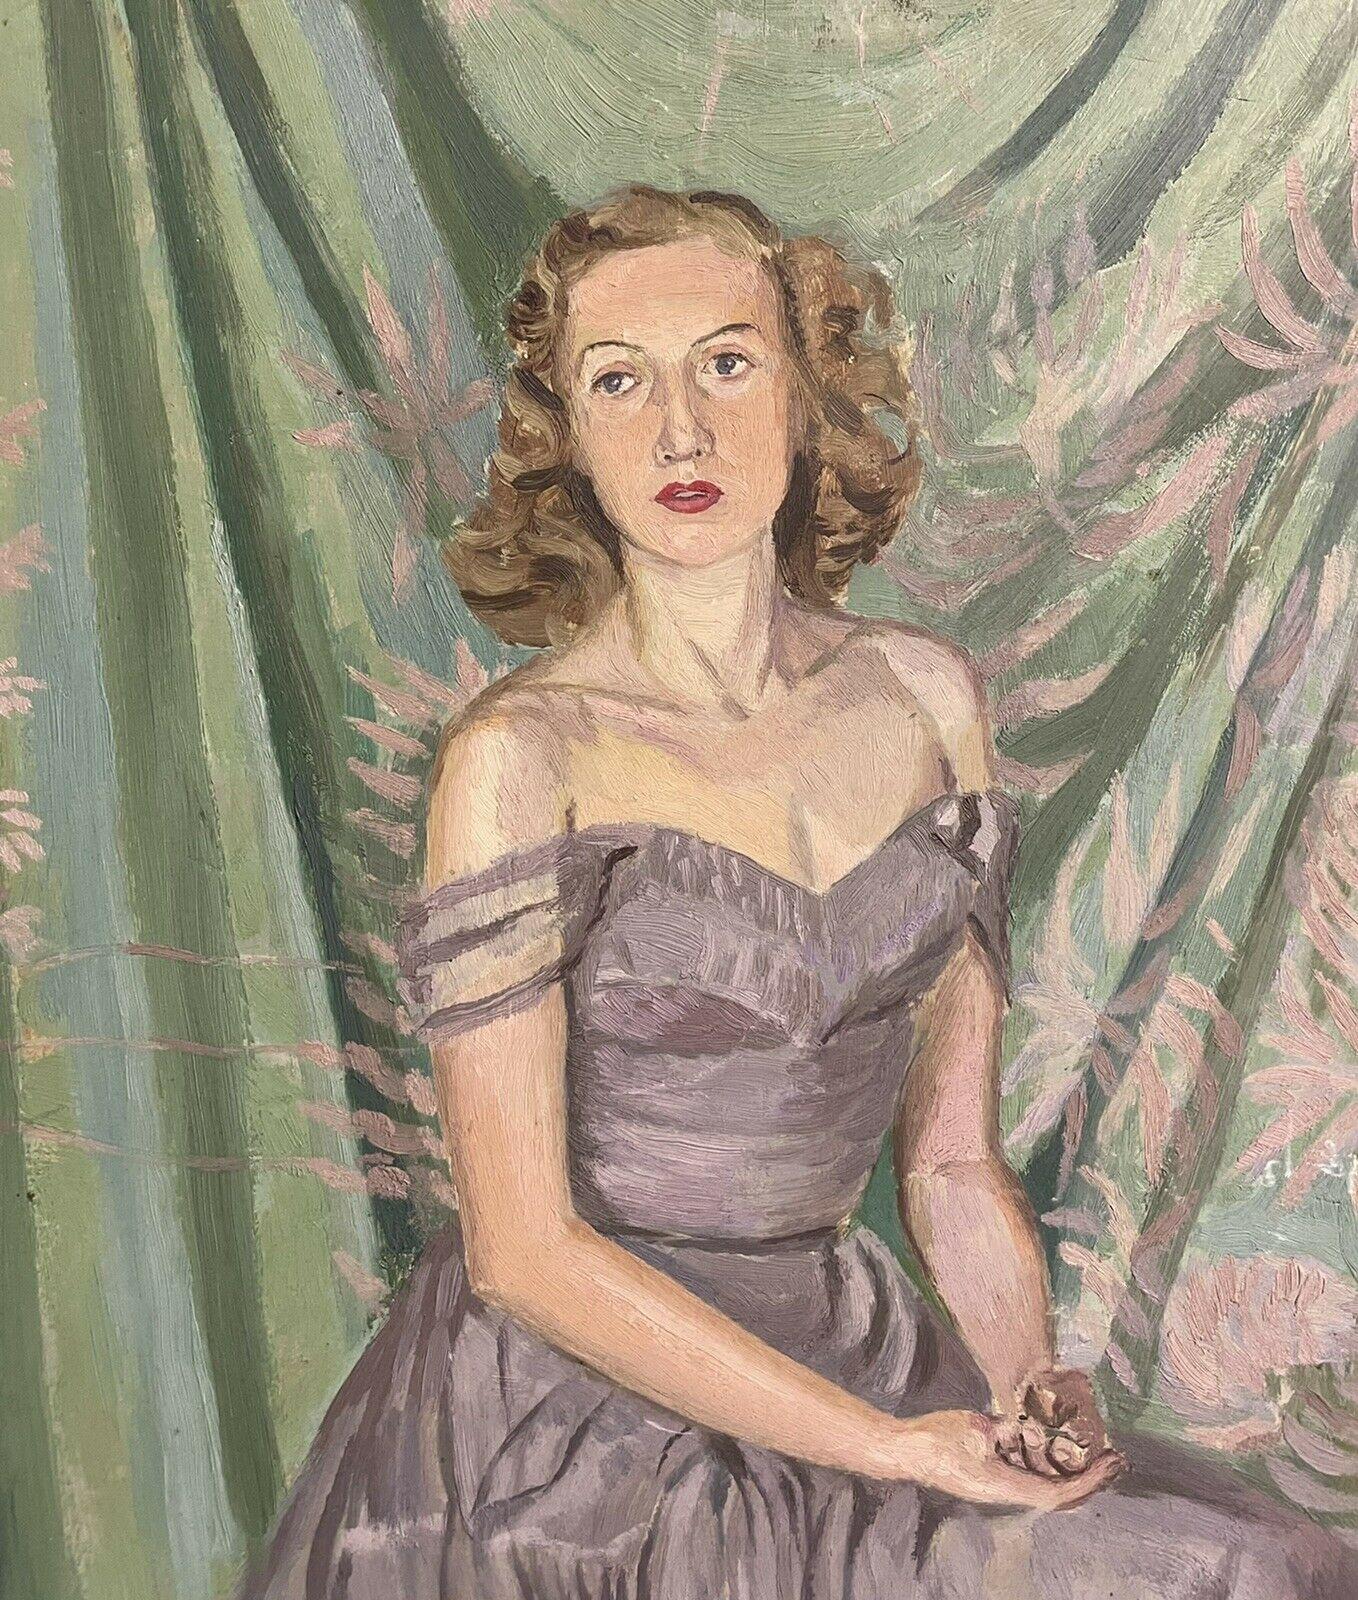 Artist/ School: Frank Graves (British 1913-2001), signed and dated 1946.

Title: Portrait of the artists wife.

Medium: oil painting on board, unframed.

Size:  painting: 22 x 14.5 inches

Provenance: private collection, England

Condition: The